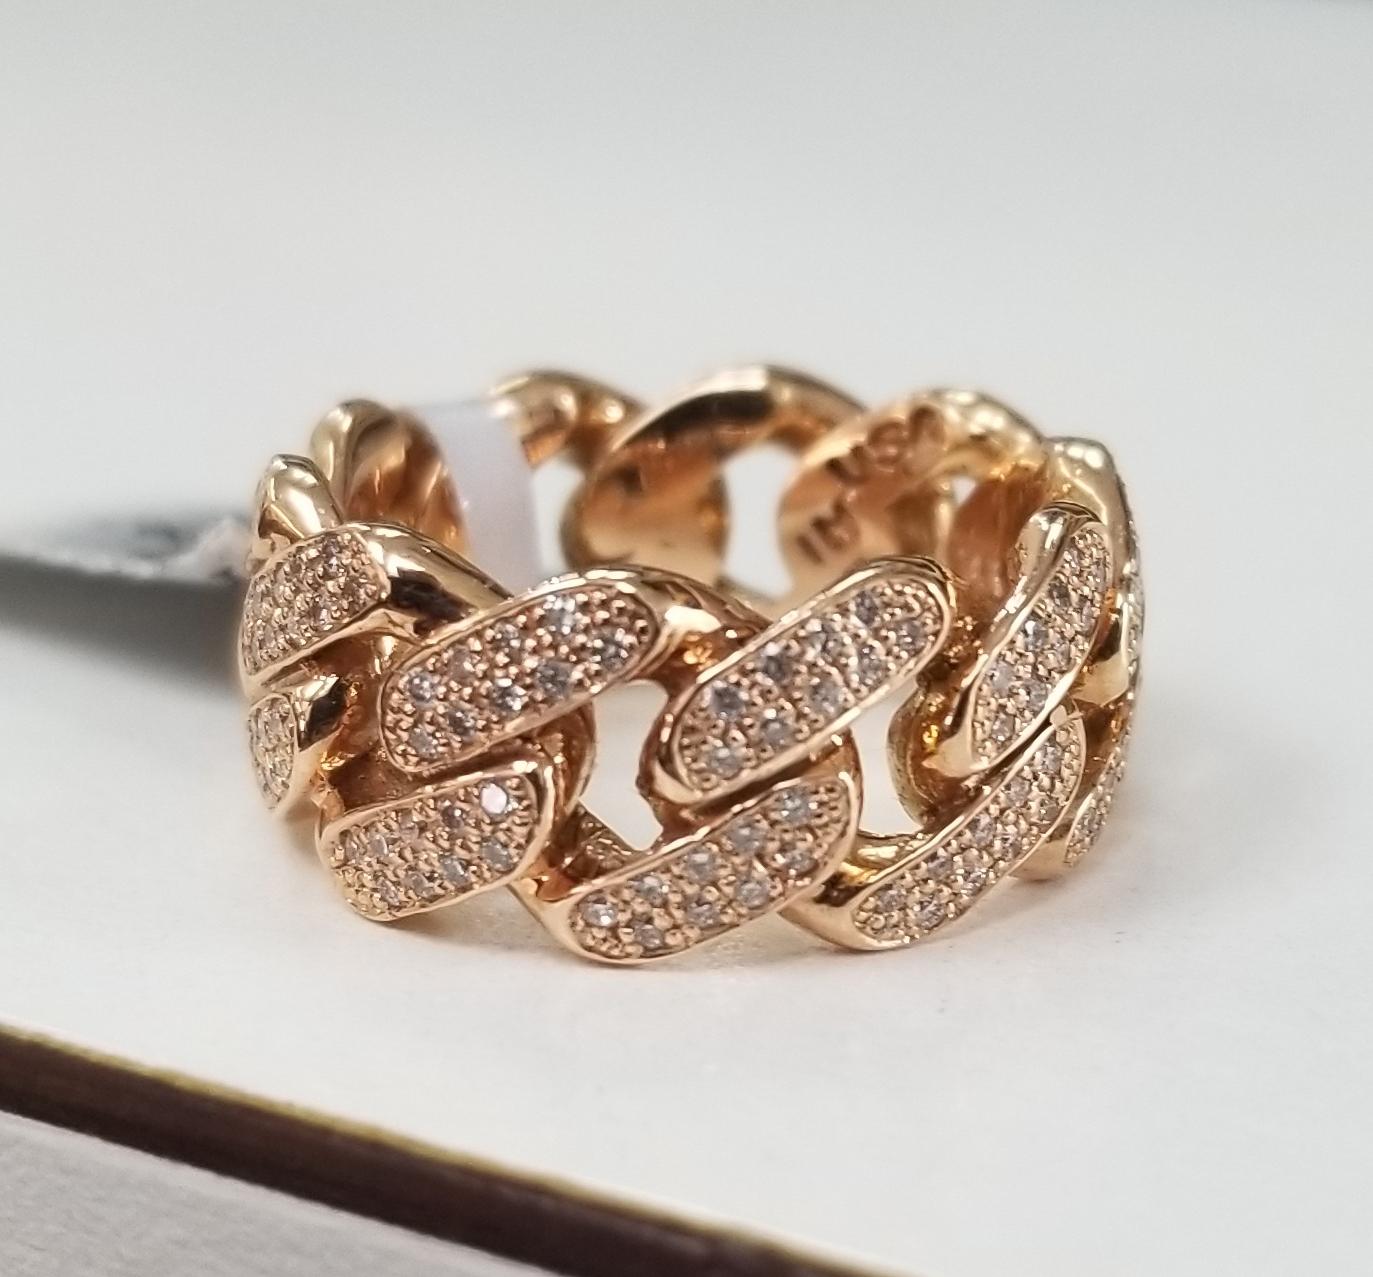 14 karat rose gold diamond pave' link ring, containing 180 round full cut diamonds of very fine quality weighing .69cts. ring size is 5 and is 5mm wide. The ring is a eternity ring, meaning diamonds all around.